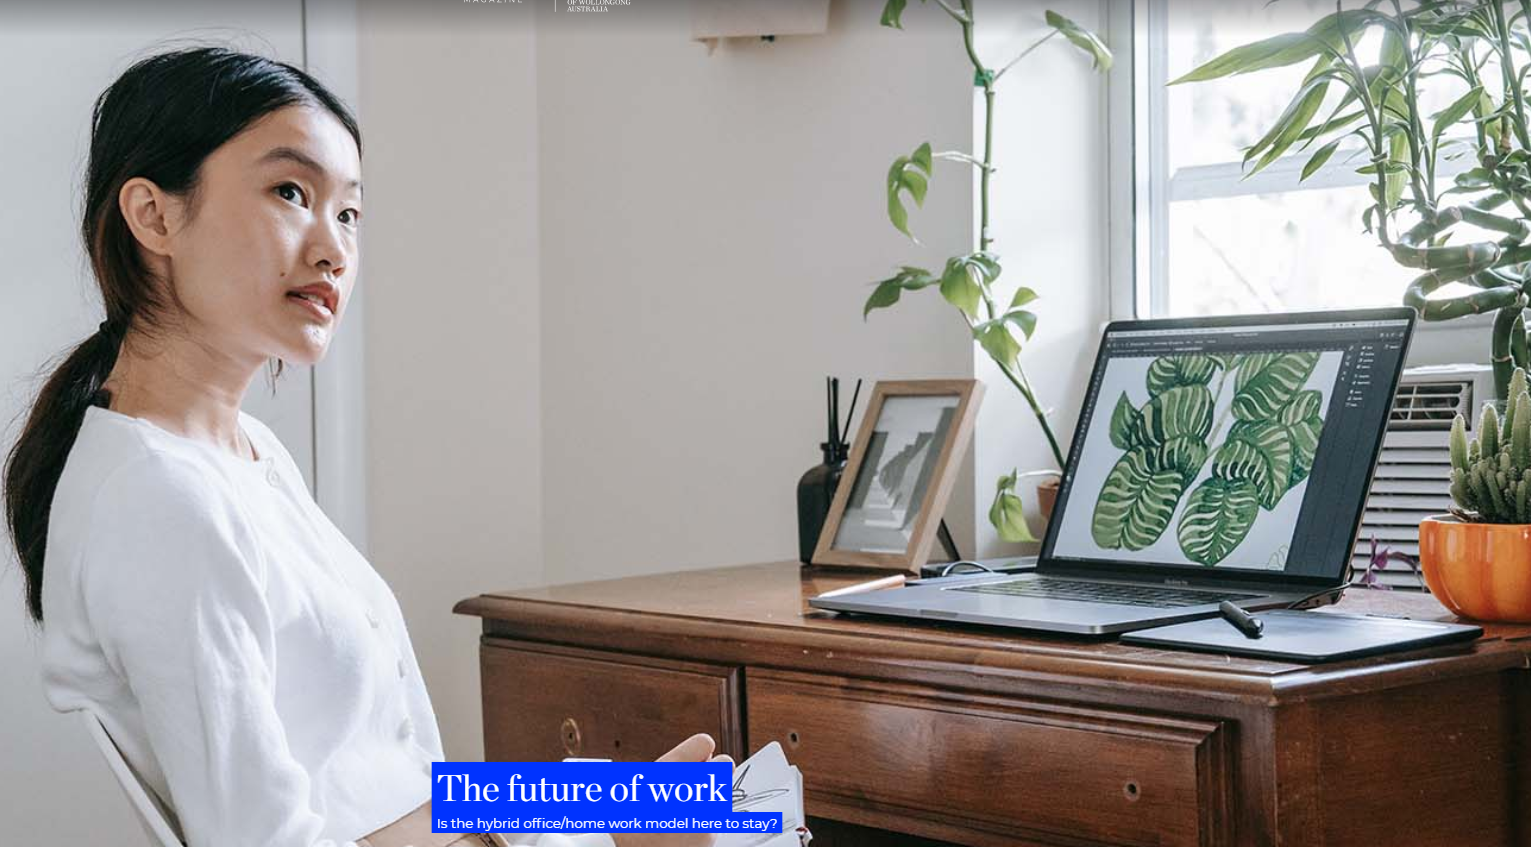 The Future of Work: Is the Hybrid office/home work model here to stay?